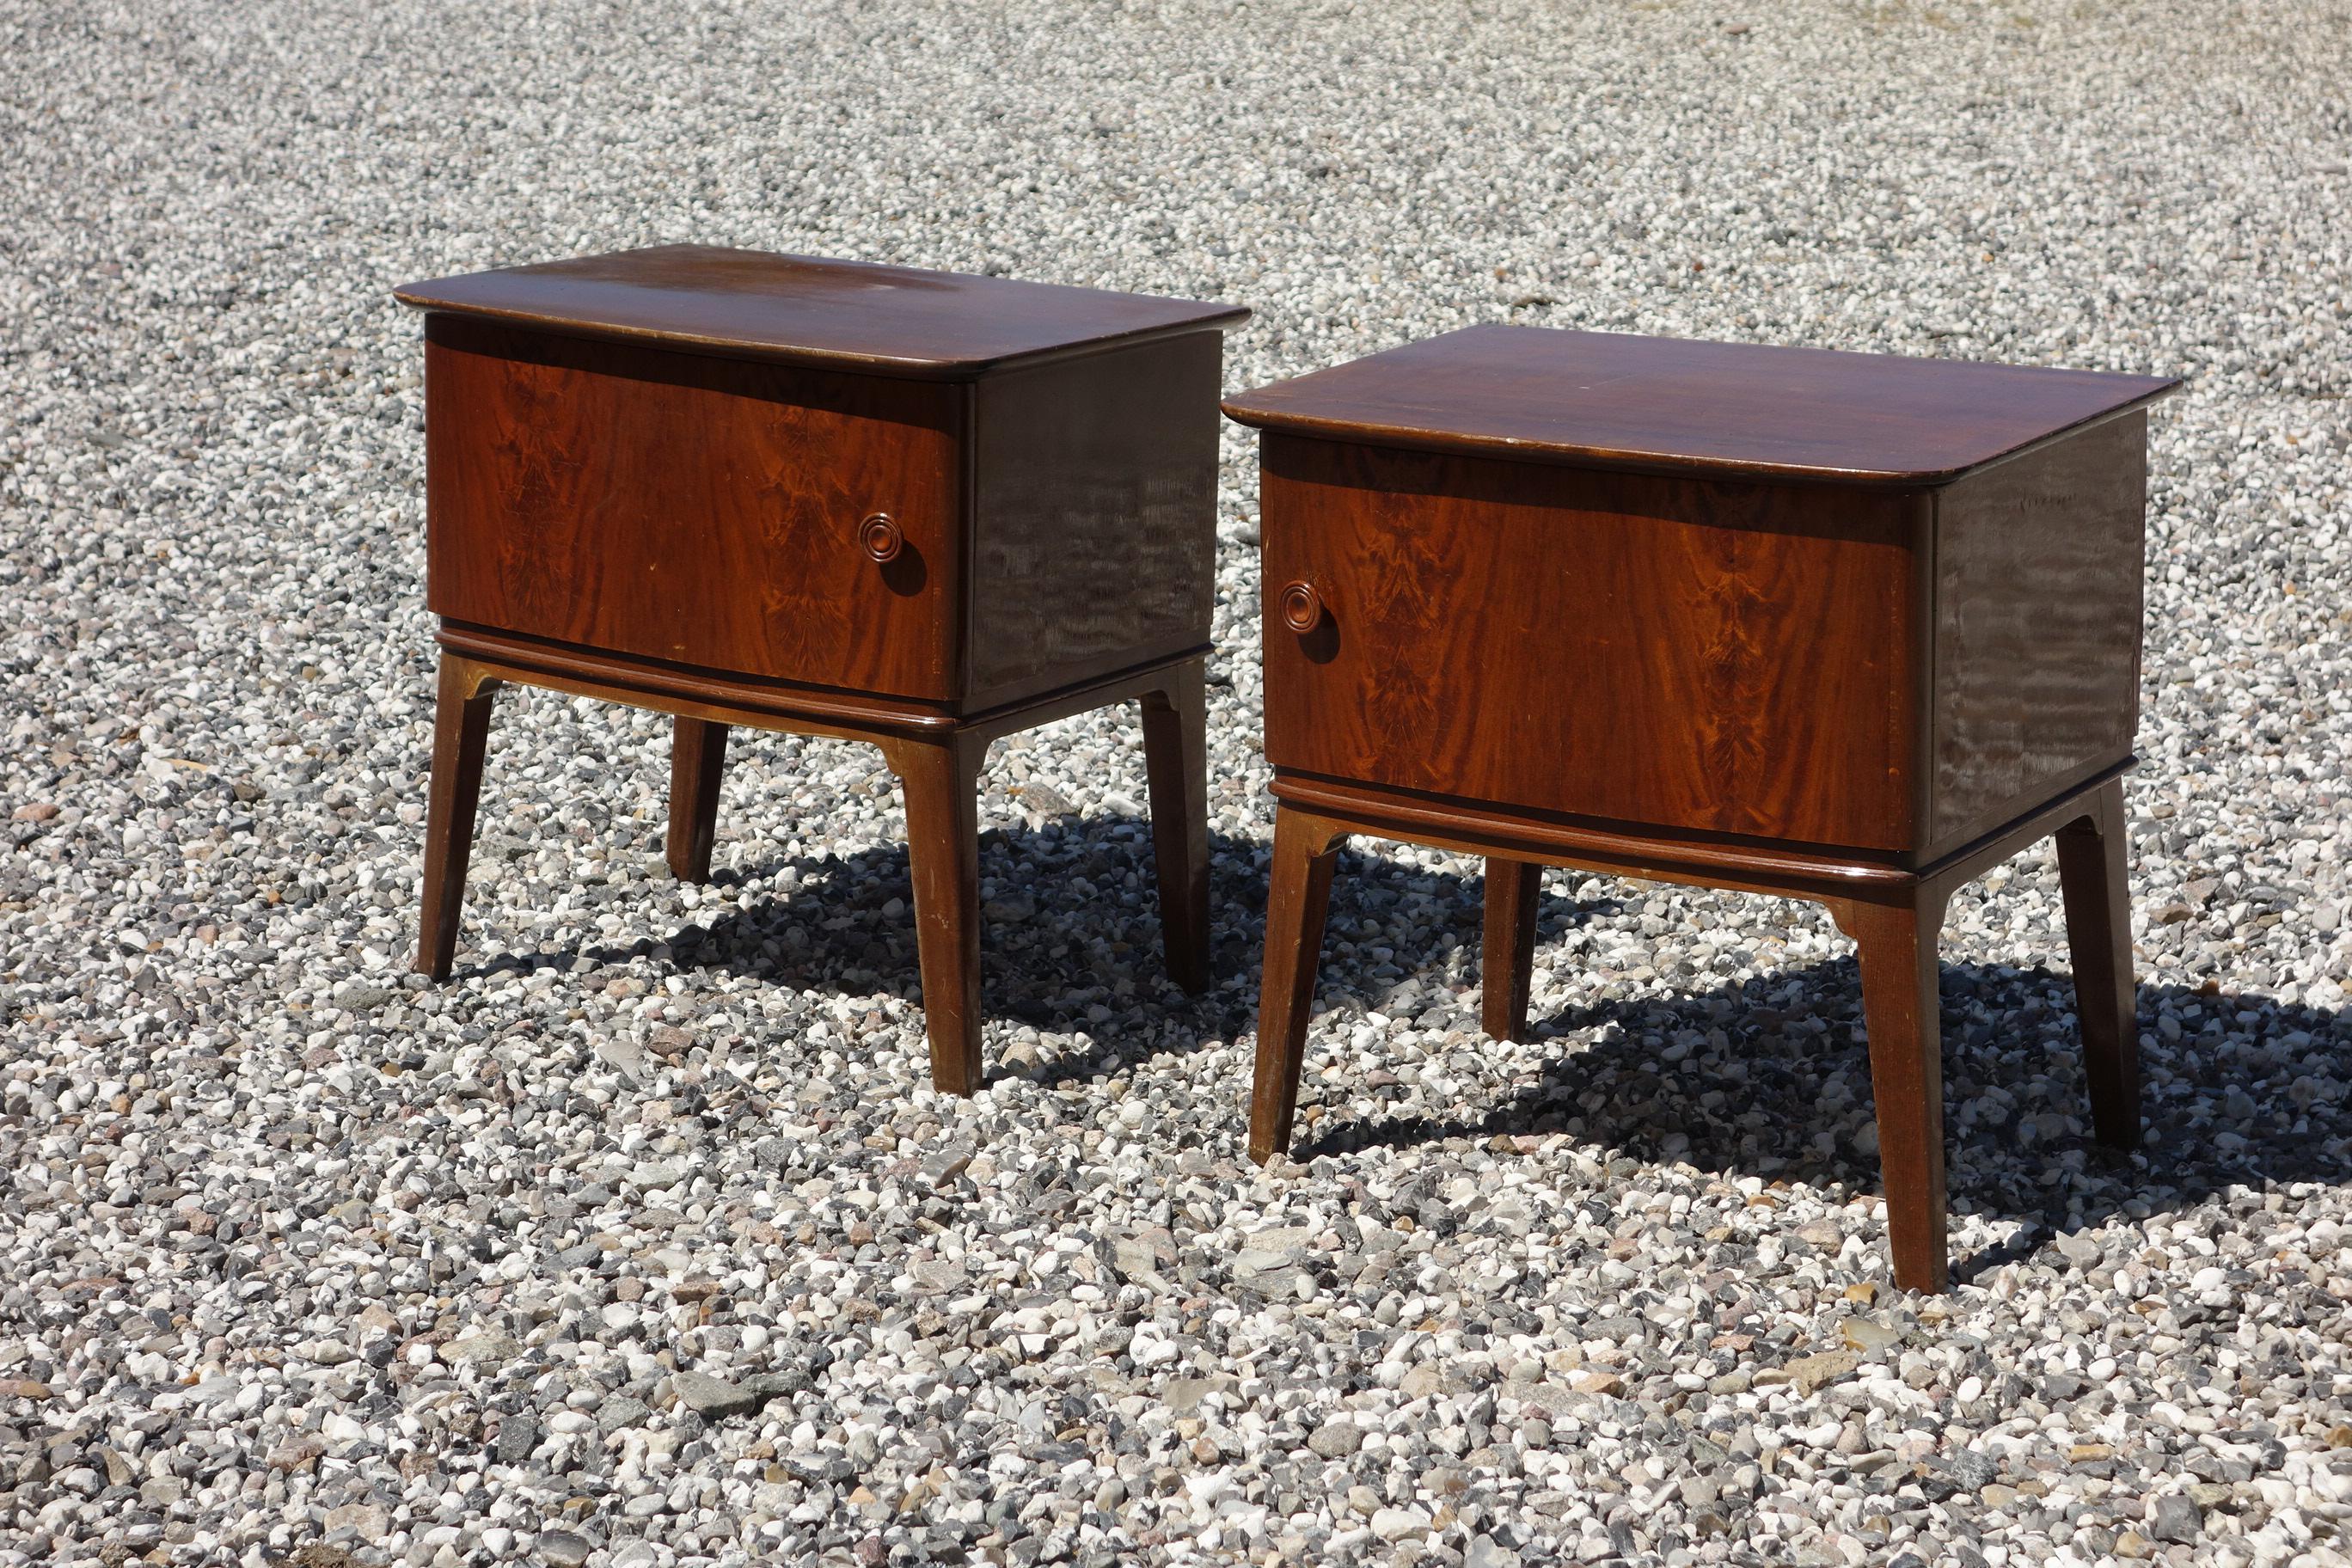 A pair of 1940s-1950s bedside tables in flamed mahogany wood.